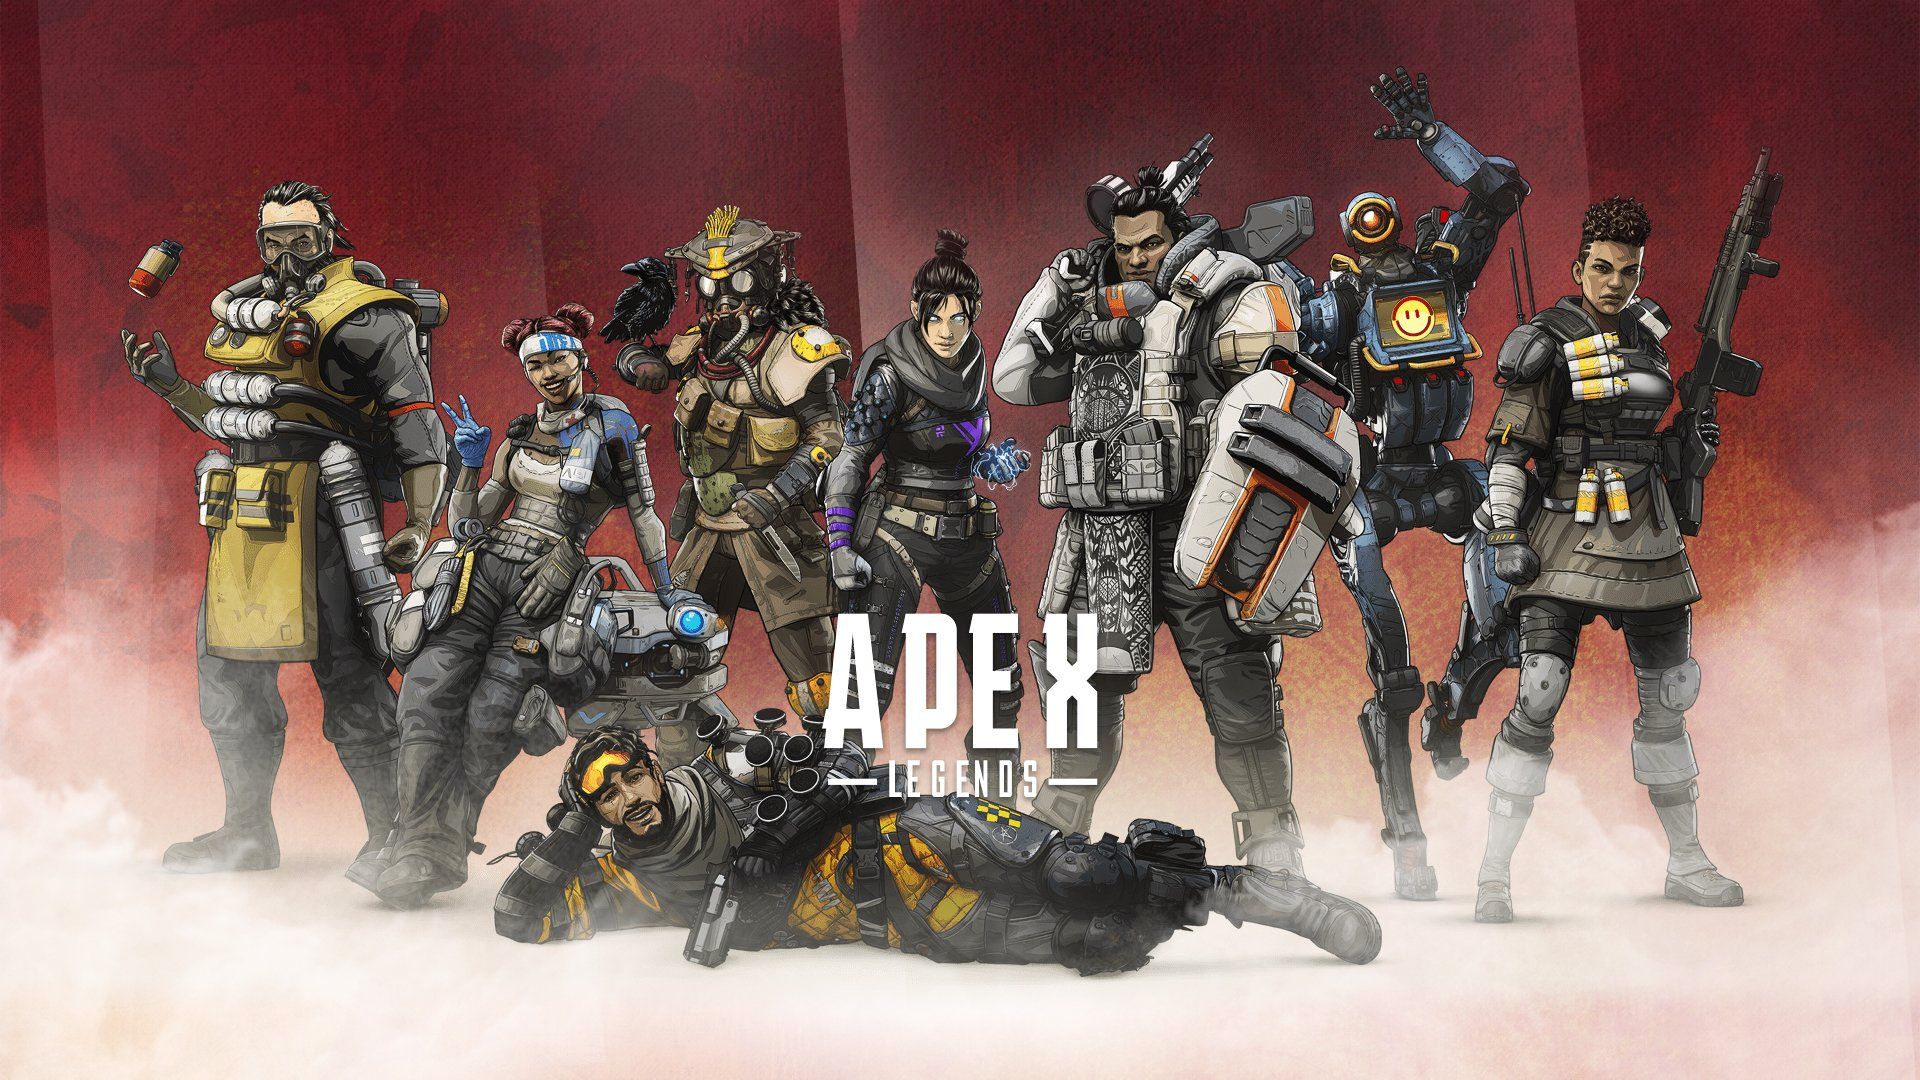 Video: Apex Legends – Stories from the Outlands: Gridiron